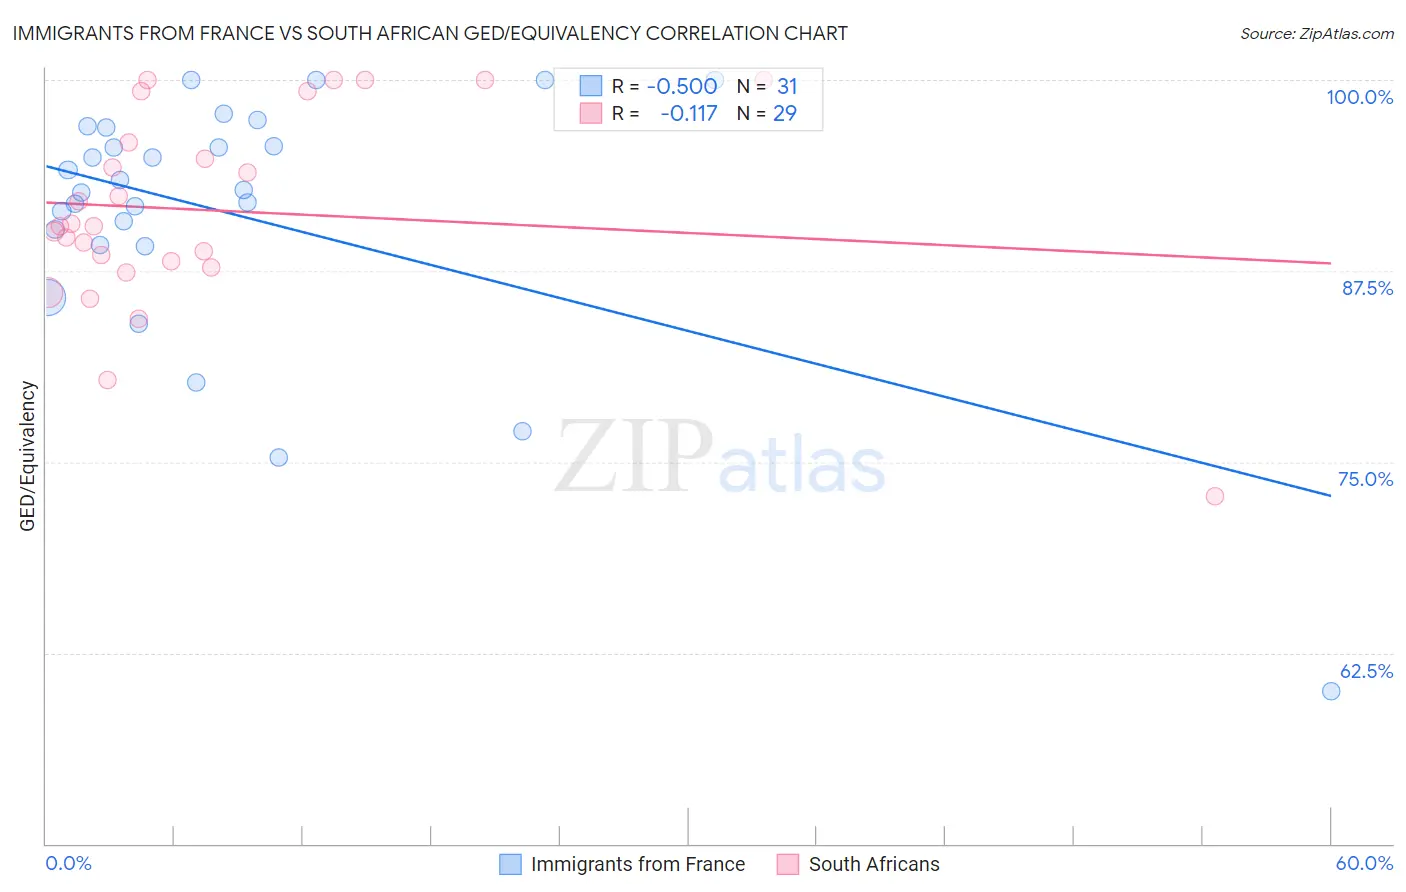 Immigrants from France vs South African GED/Equivalency